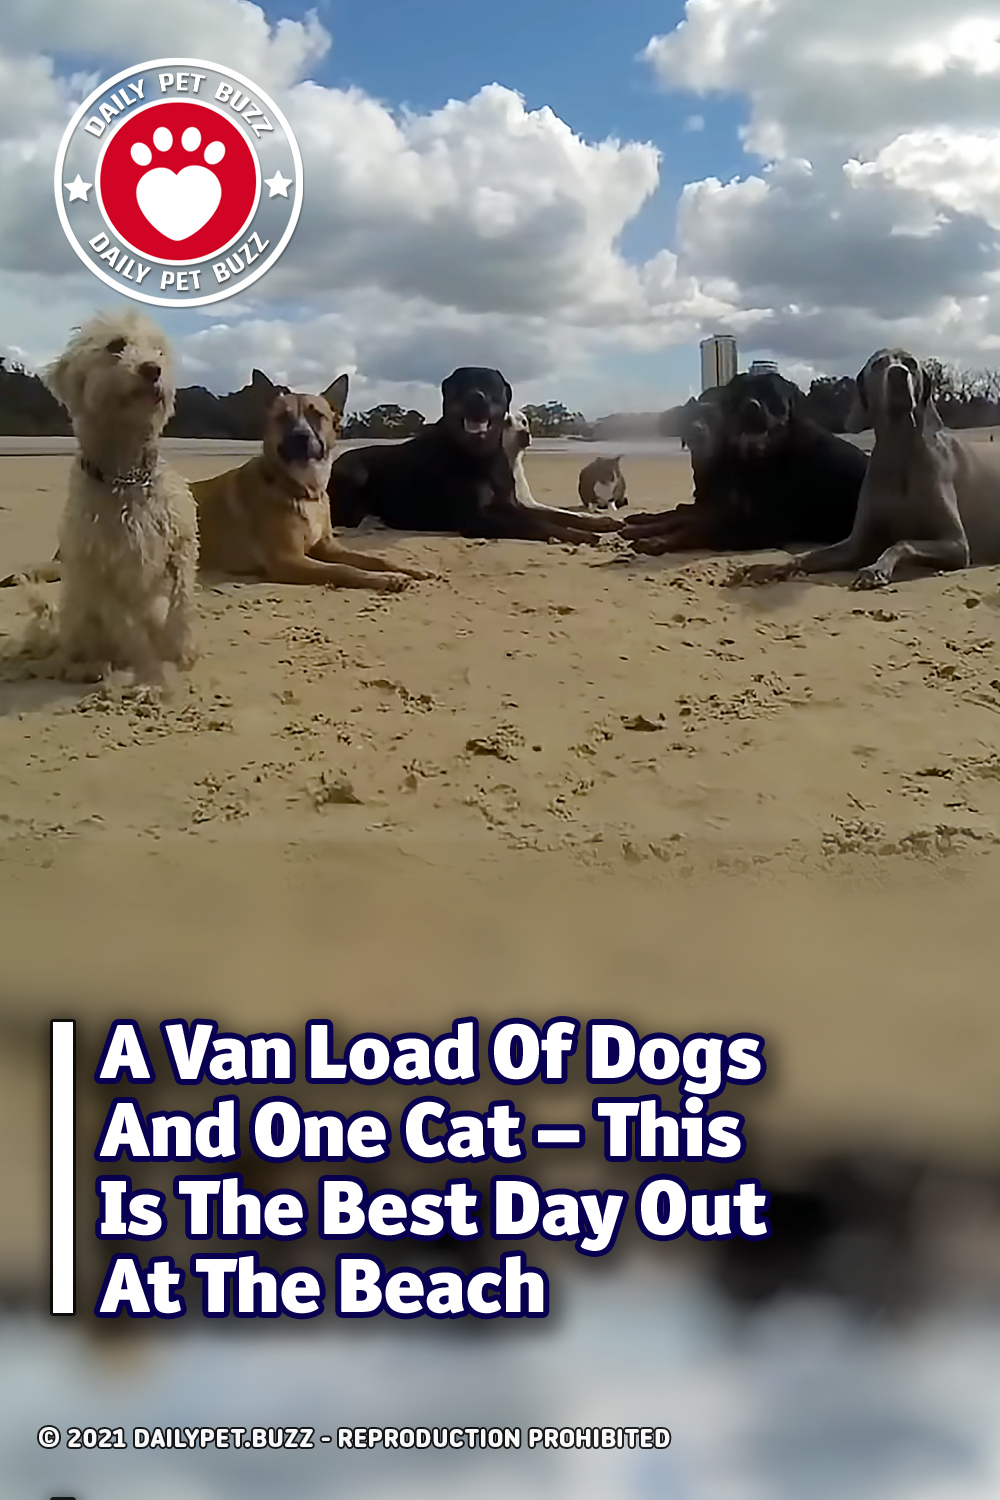 A Van Load Of Dogs And One Cat – This Is The Best Day Out At The Beach